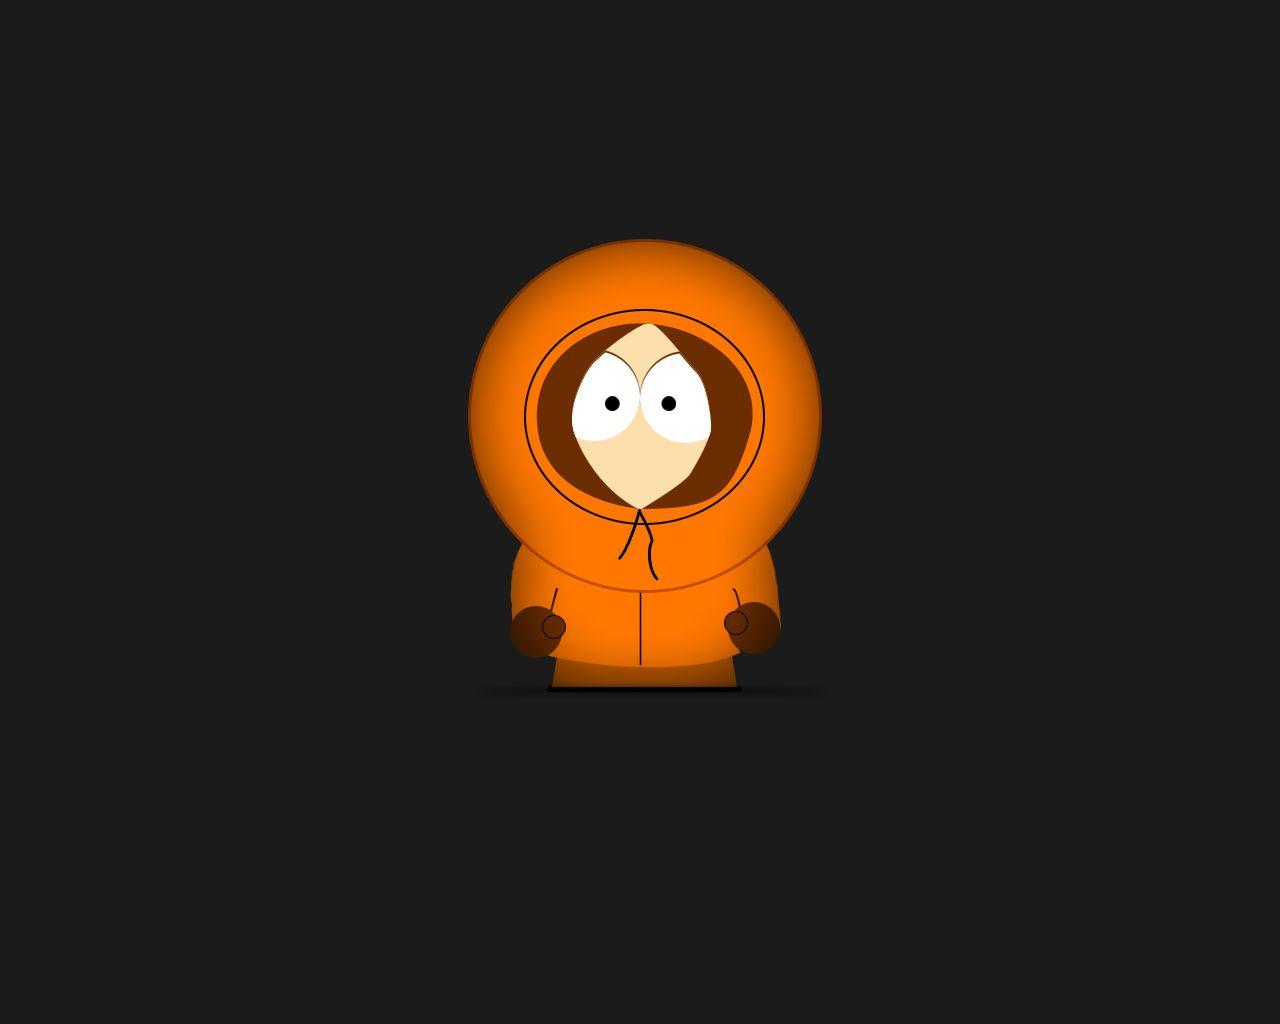 Mobile wallpaper South Park Tv Show Kenny Mccormick 1119037 download  the picture for free